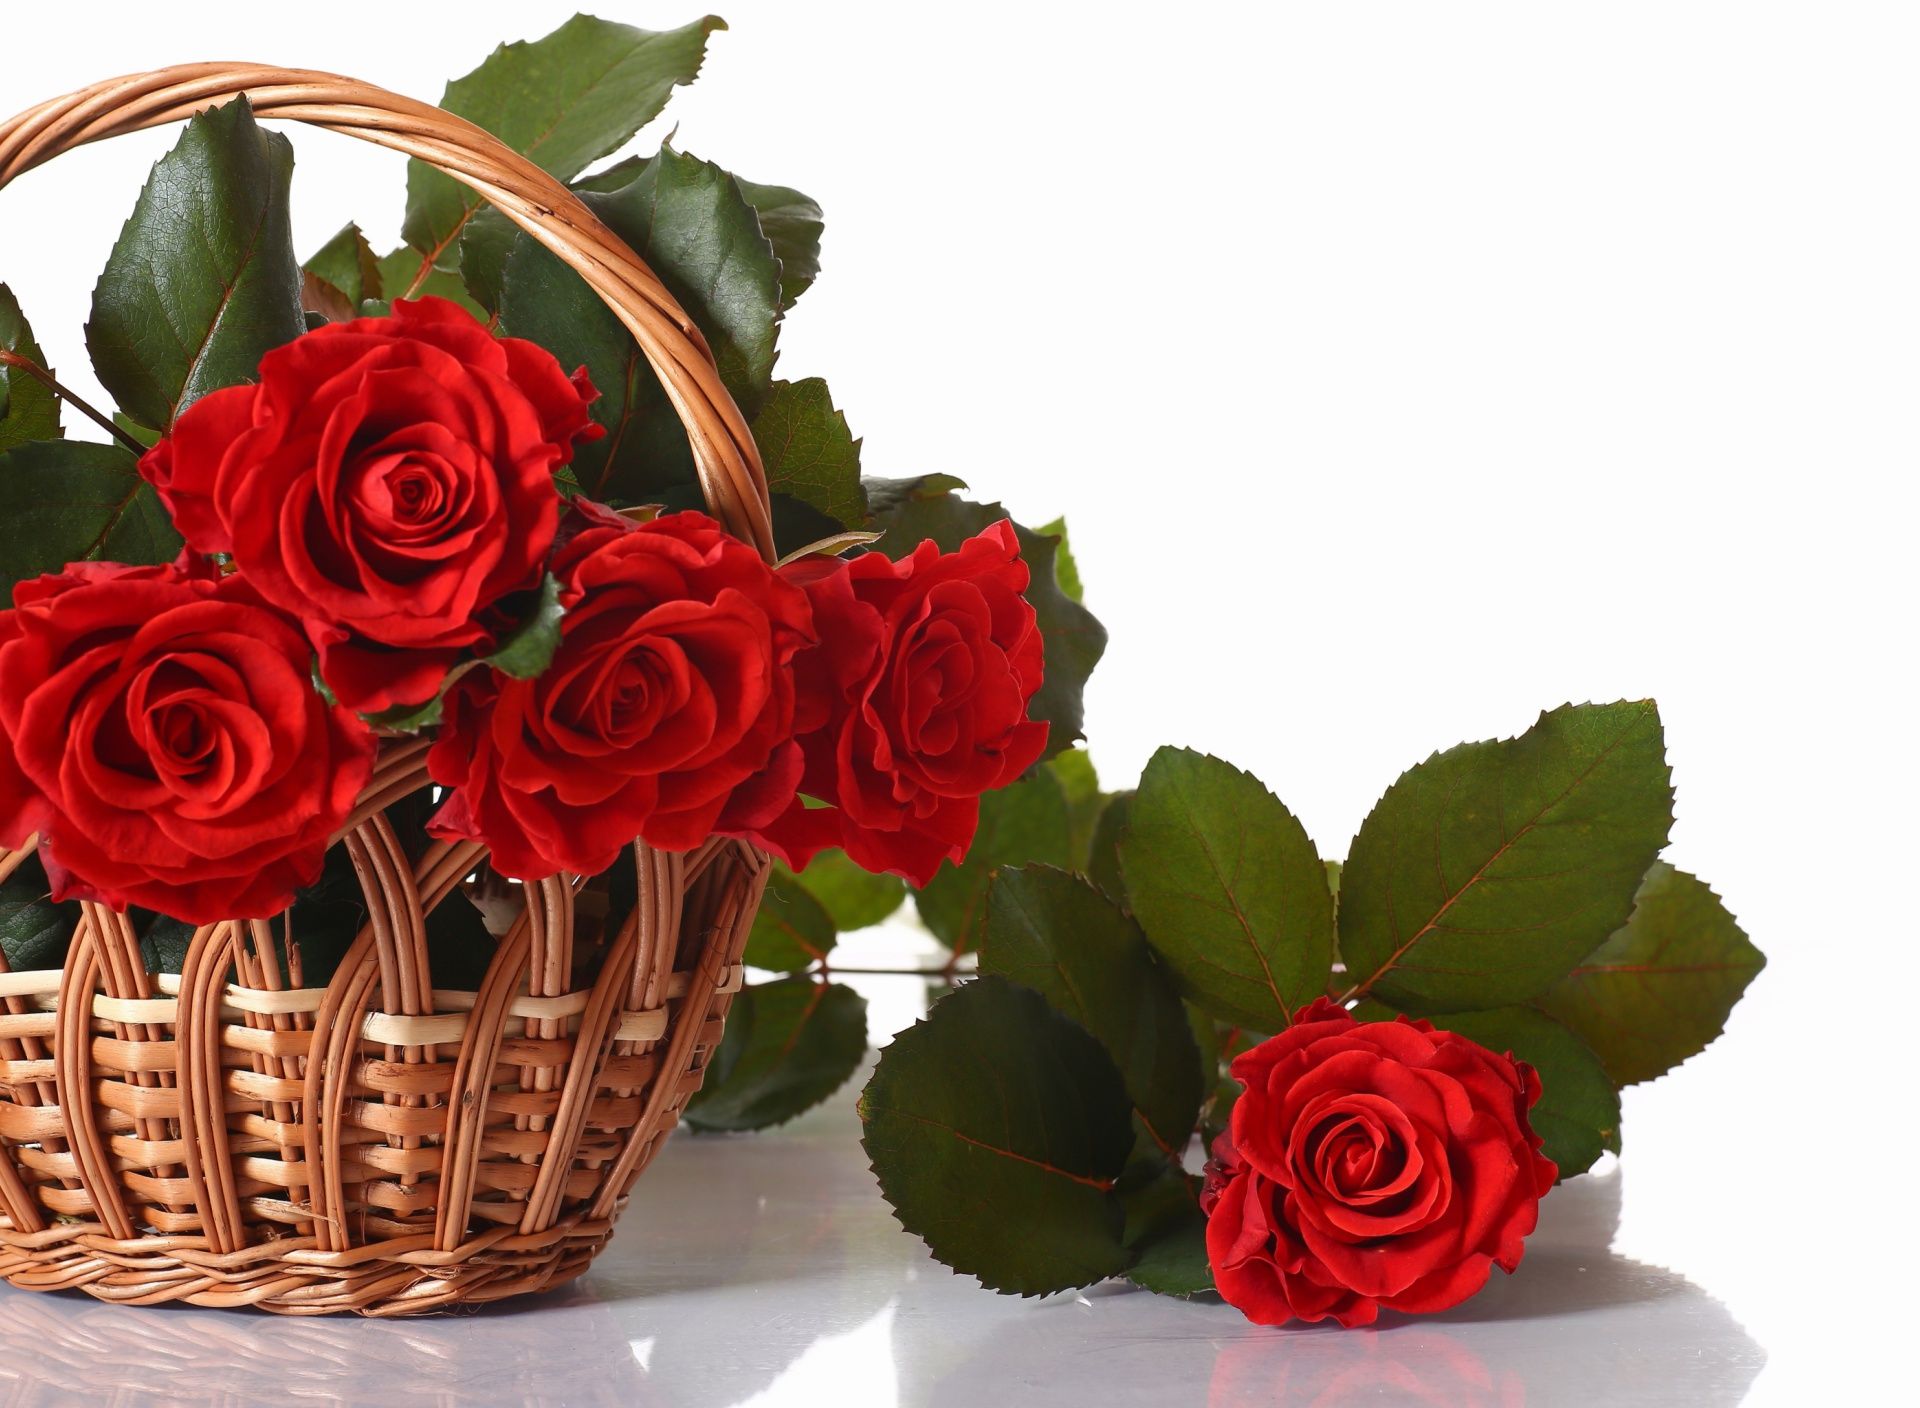 Das Basket with Roses Wallpaper 1920x1408